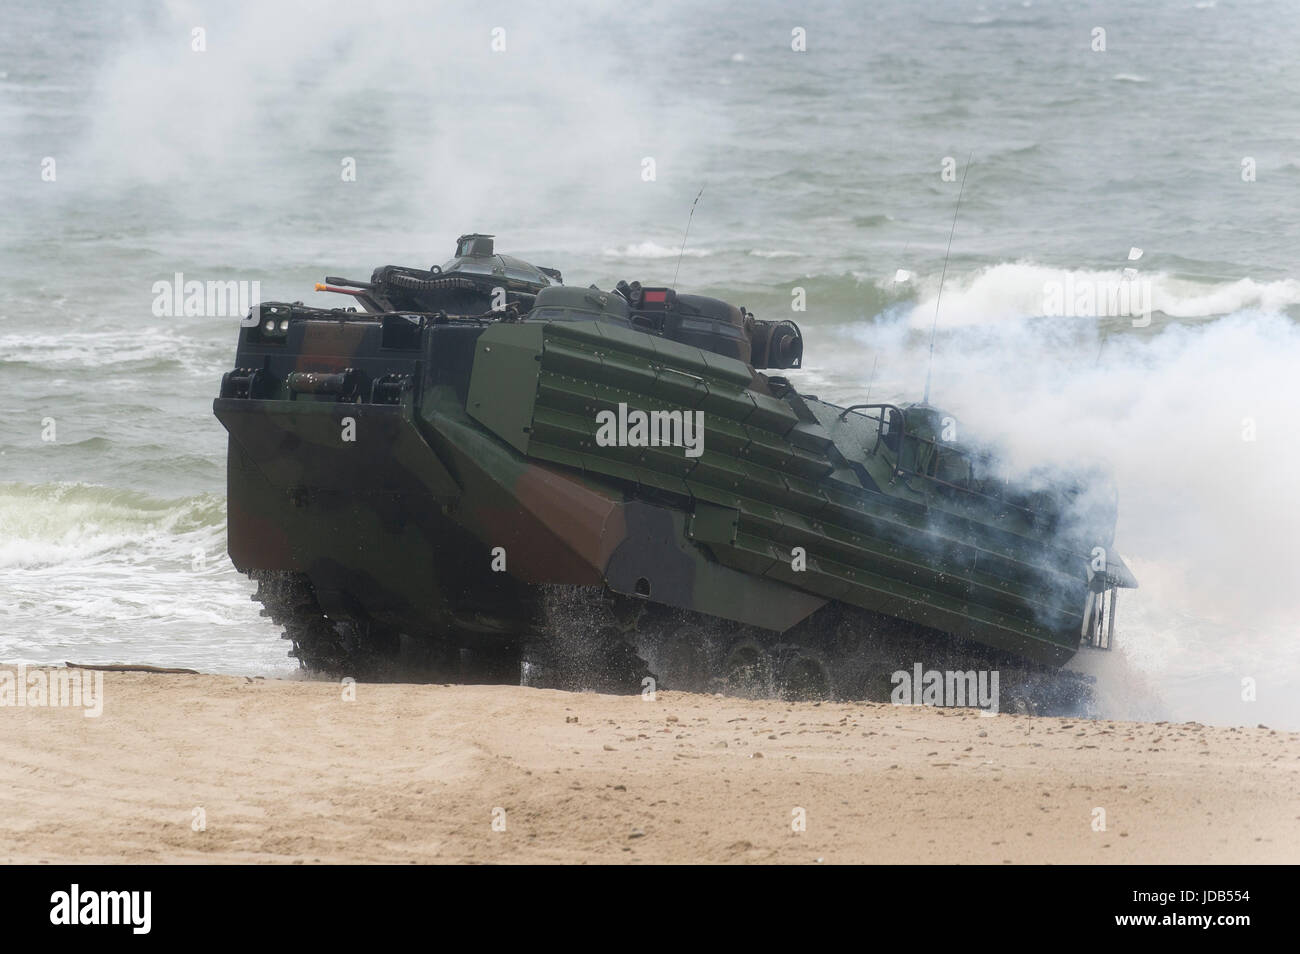 An American Assault Amphibious Vehicle AAV-7 is landing on the beach during the 45th edition of Exercise BALTIC OPERATIONS  BALTOPS 2017 in Ustka, Pol Stock Photo